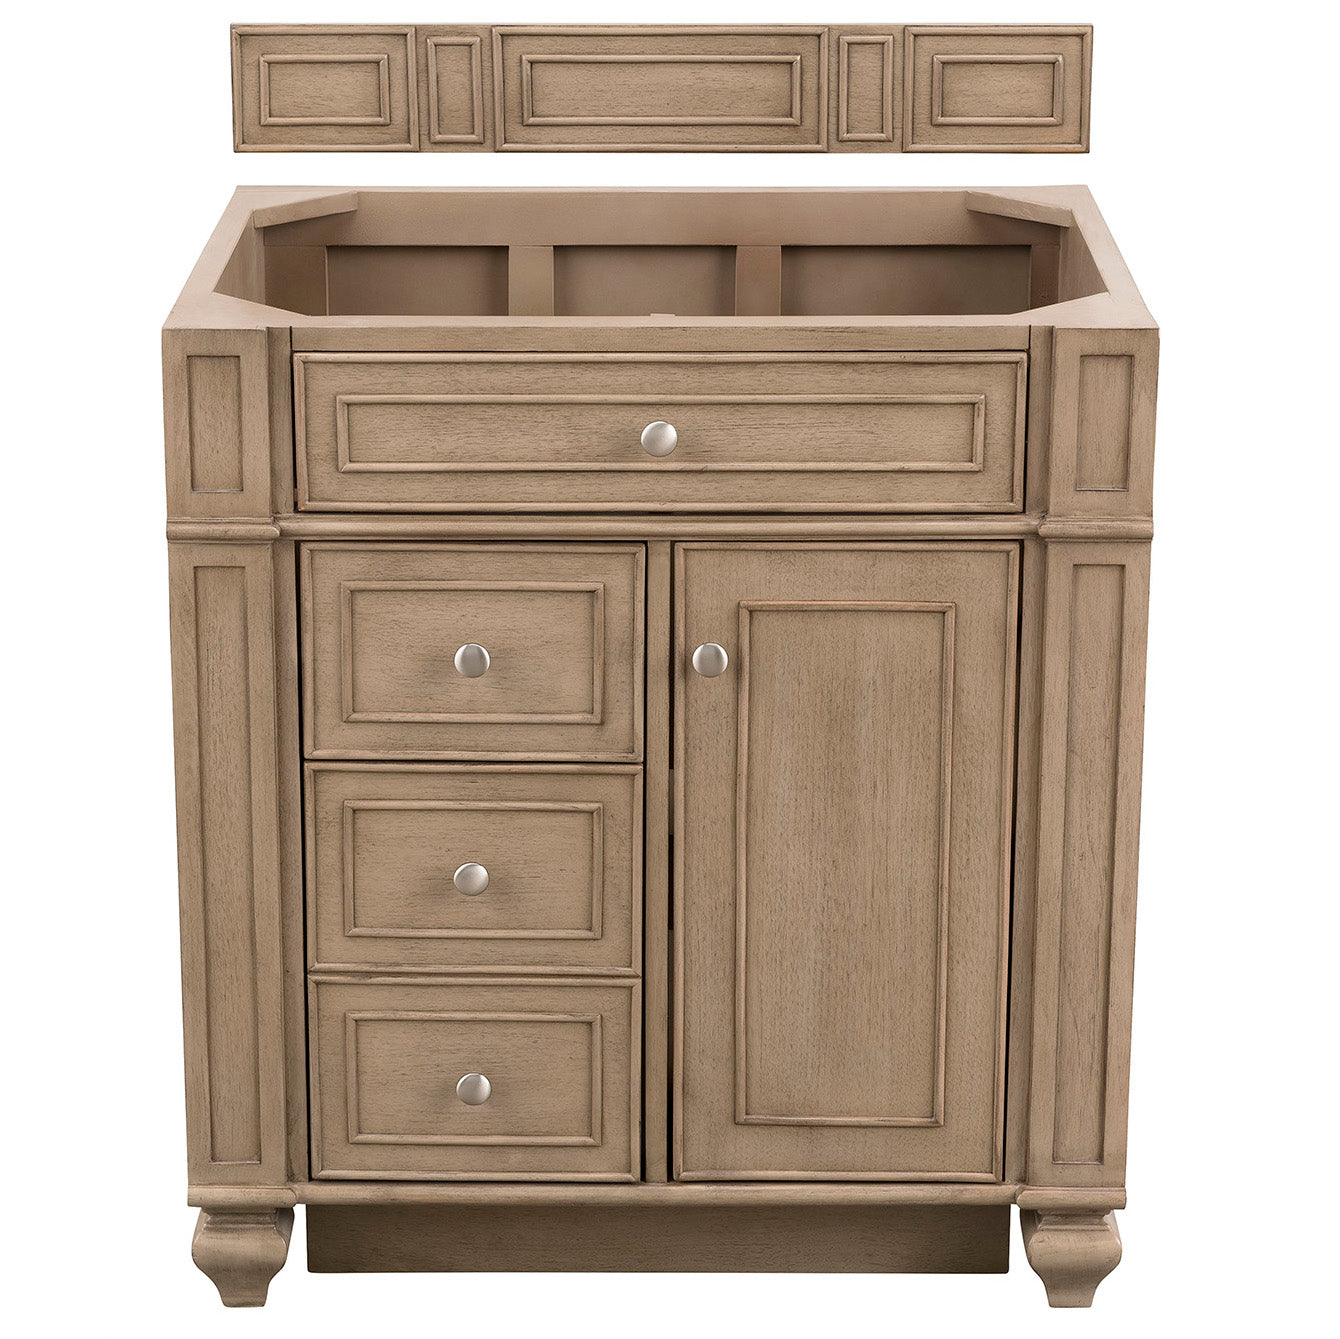 James Martin Vanities Bristol Collection 30 in. Single Vanity in Whitewashed Walnut, Cabinet Only